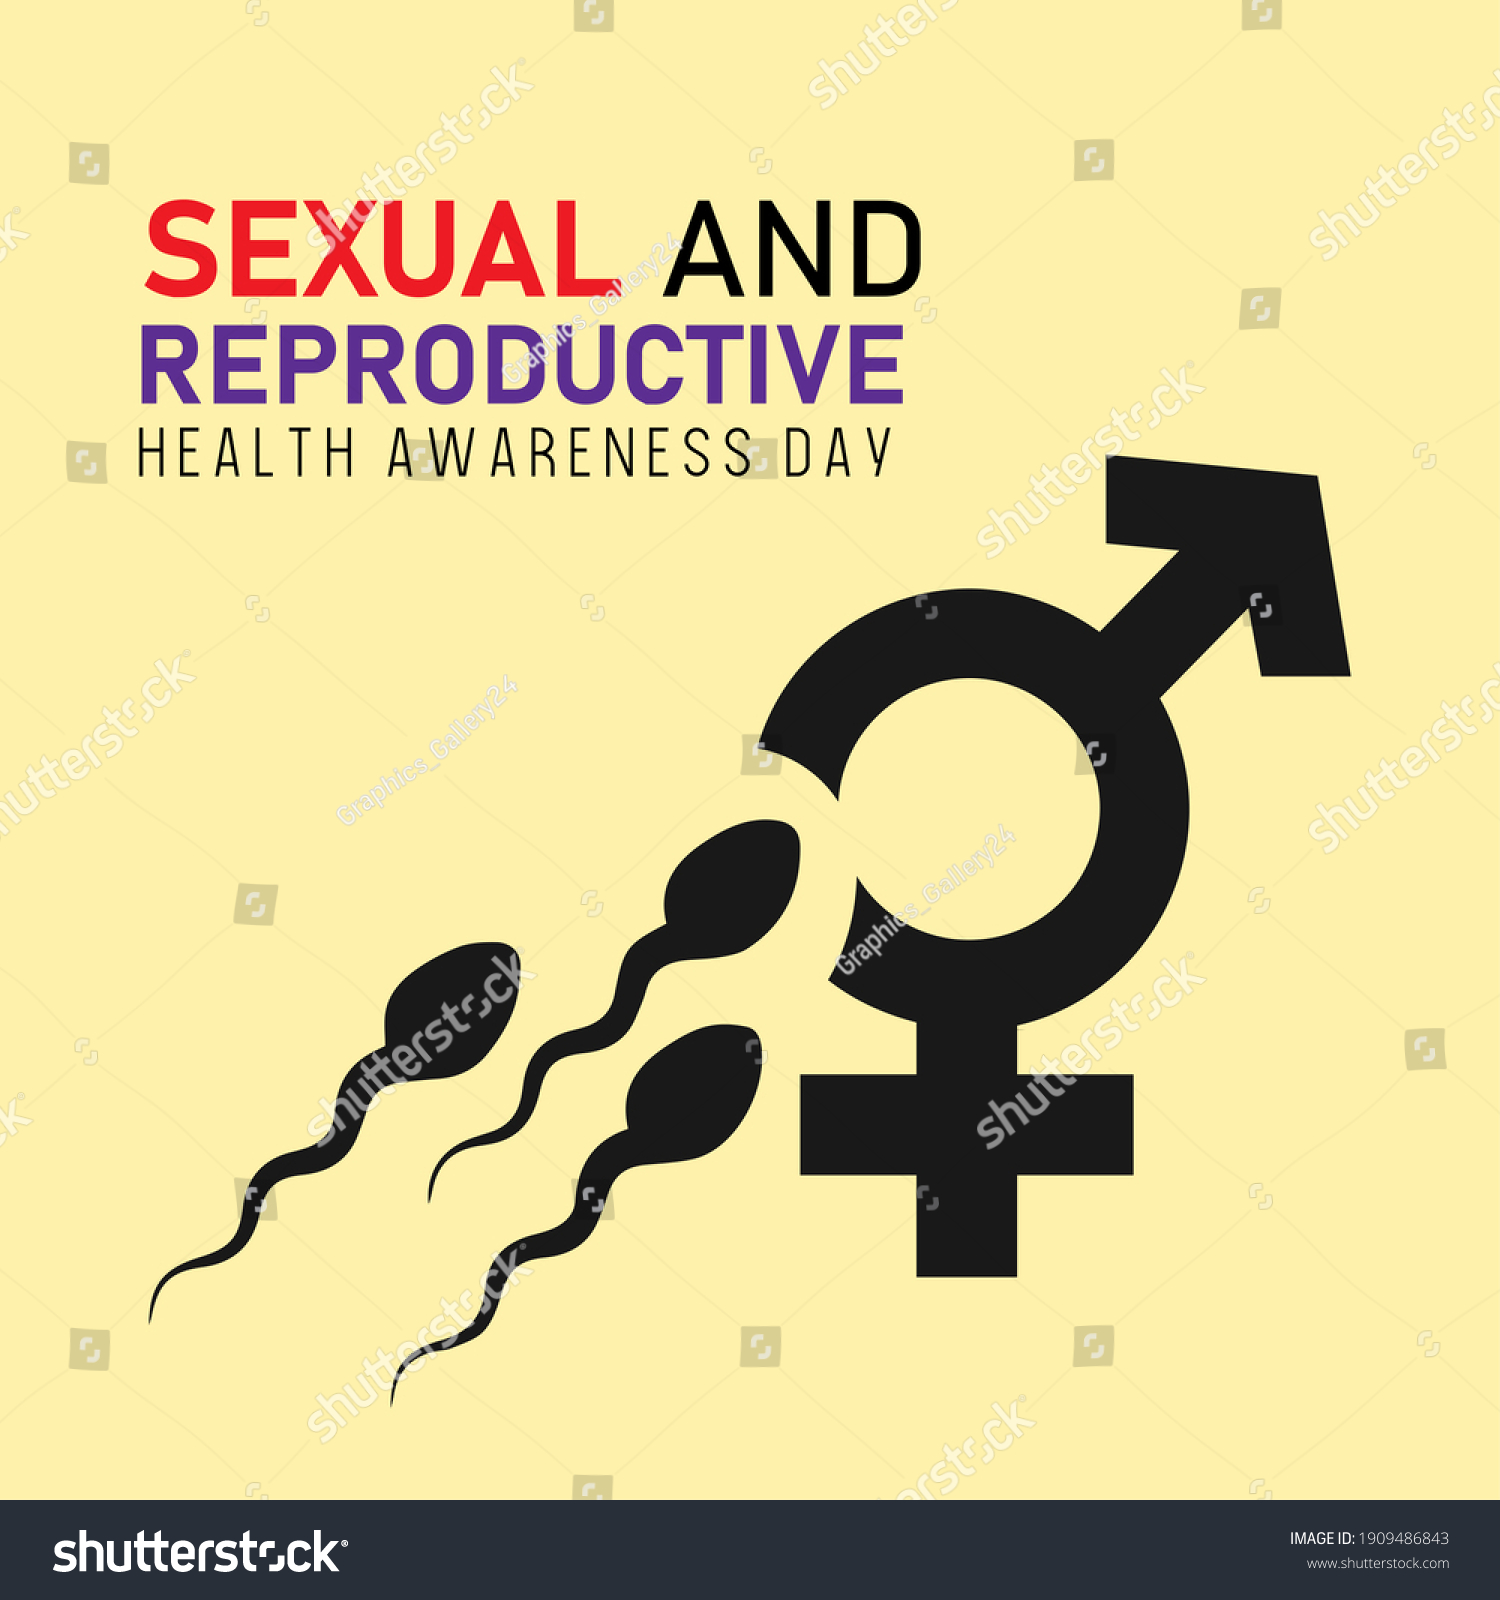 Sexual Reproductive Health Awareness Day Stock Illustration 1909486843 Shutterstock 1580